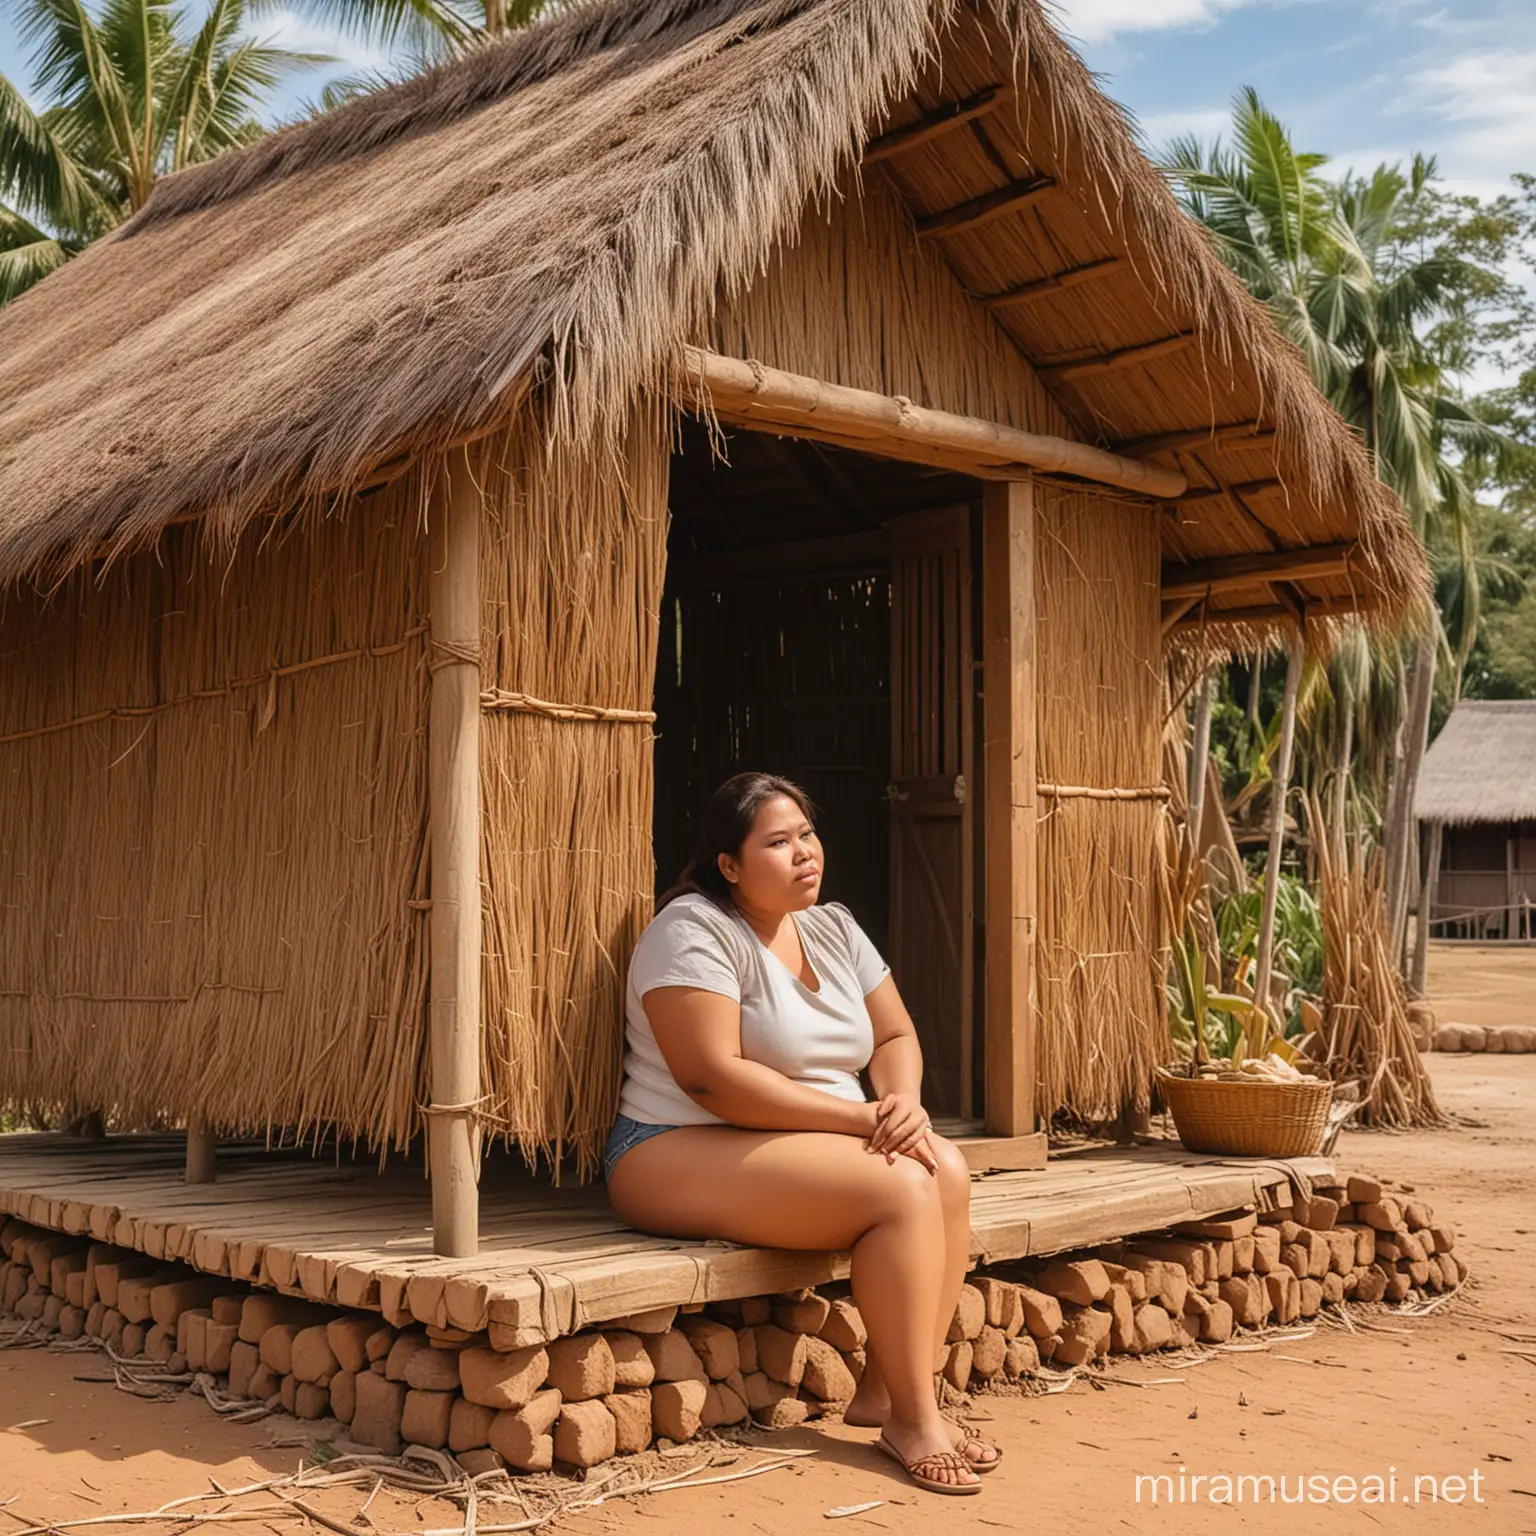 Ain image of a chubby filipina woman with brown complexion sitting outside a nipa hut on a deep thought.
Make sure that the image is on side view facing a brown dry and barren fields